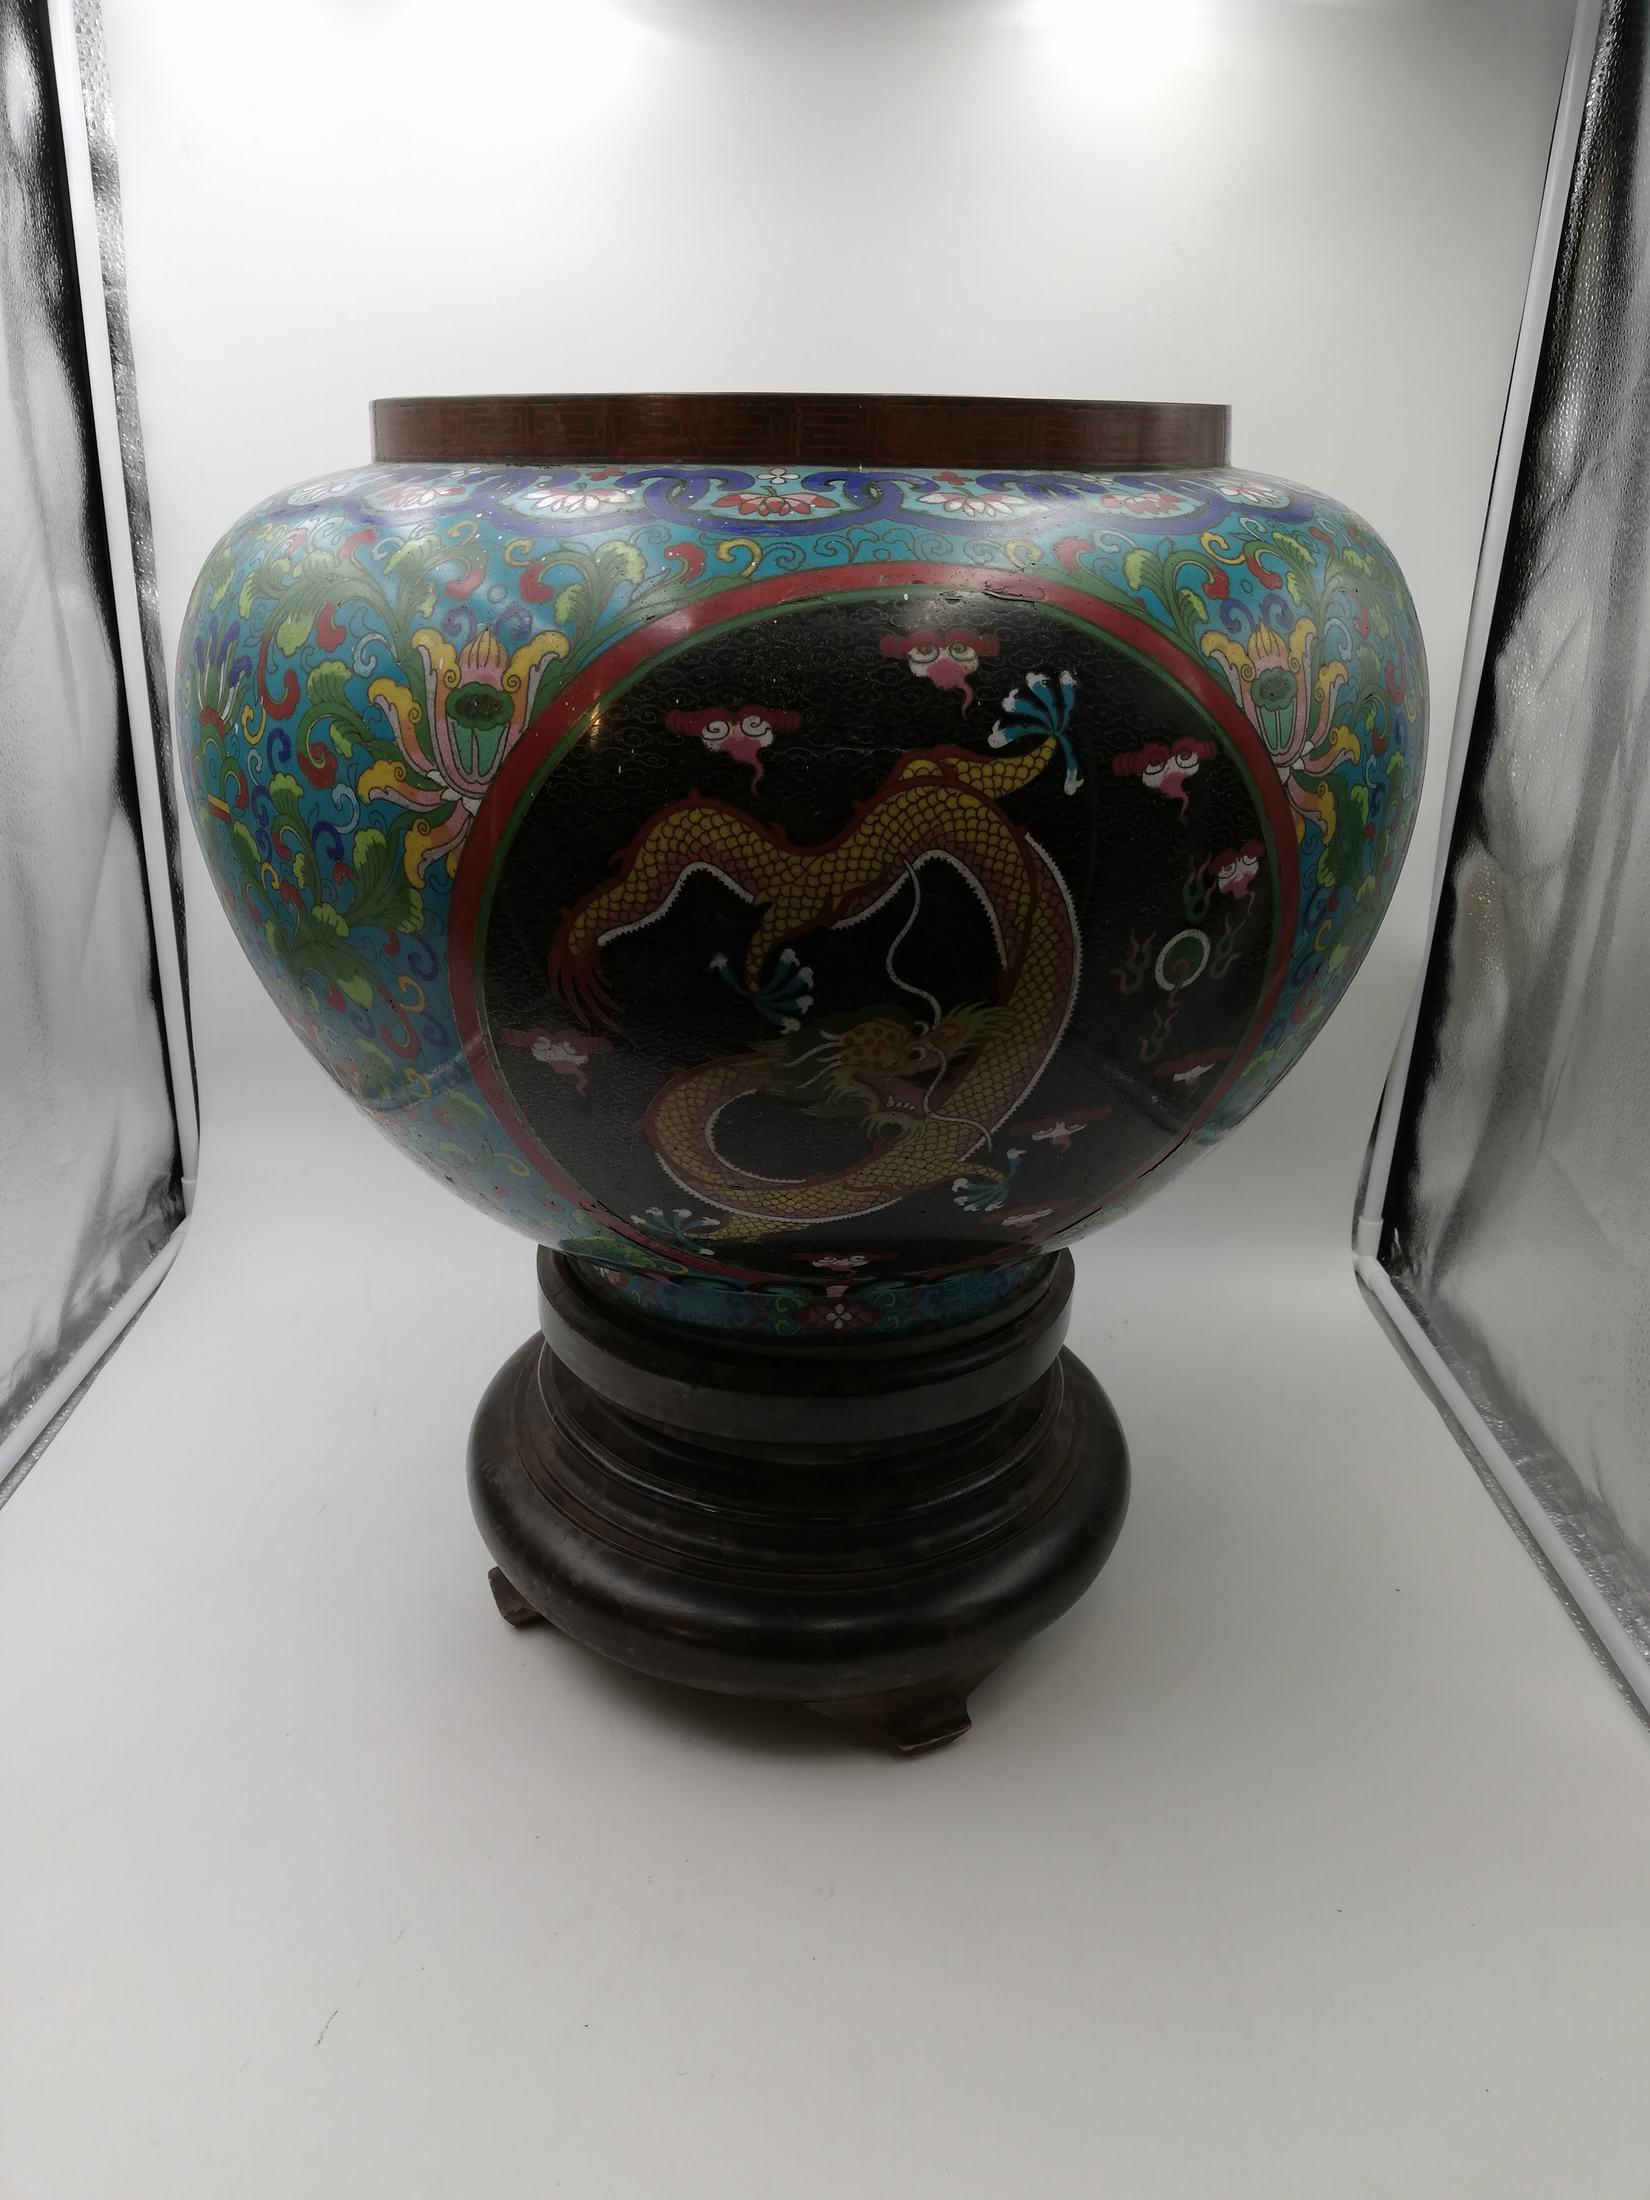 Spherical Vase Forming Planter Cloisonné Decorated with Polychrome Floral Motifs For Sale 4